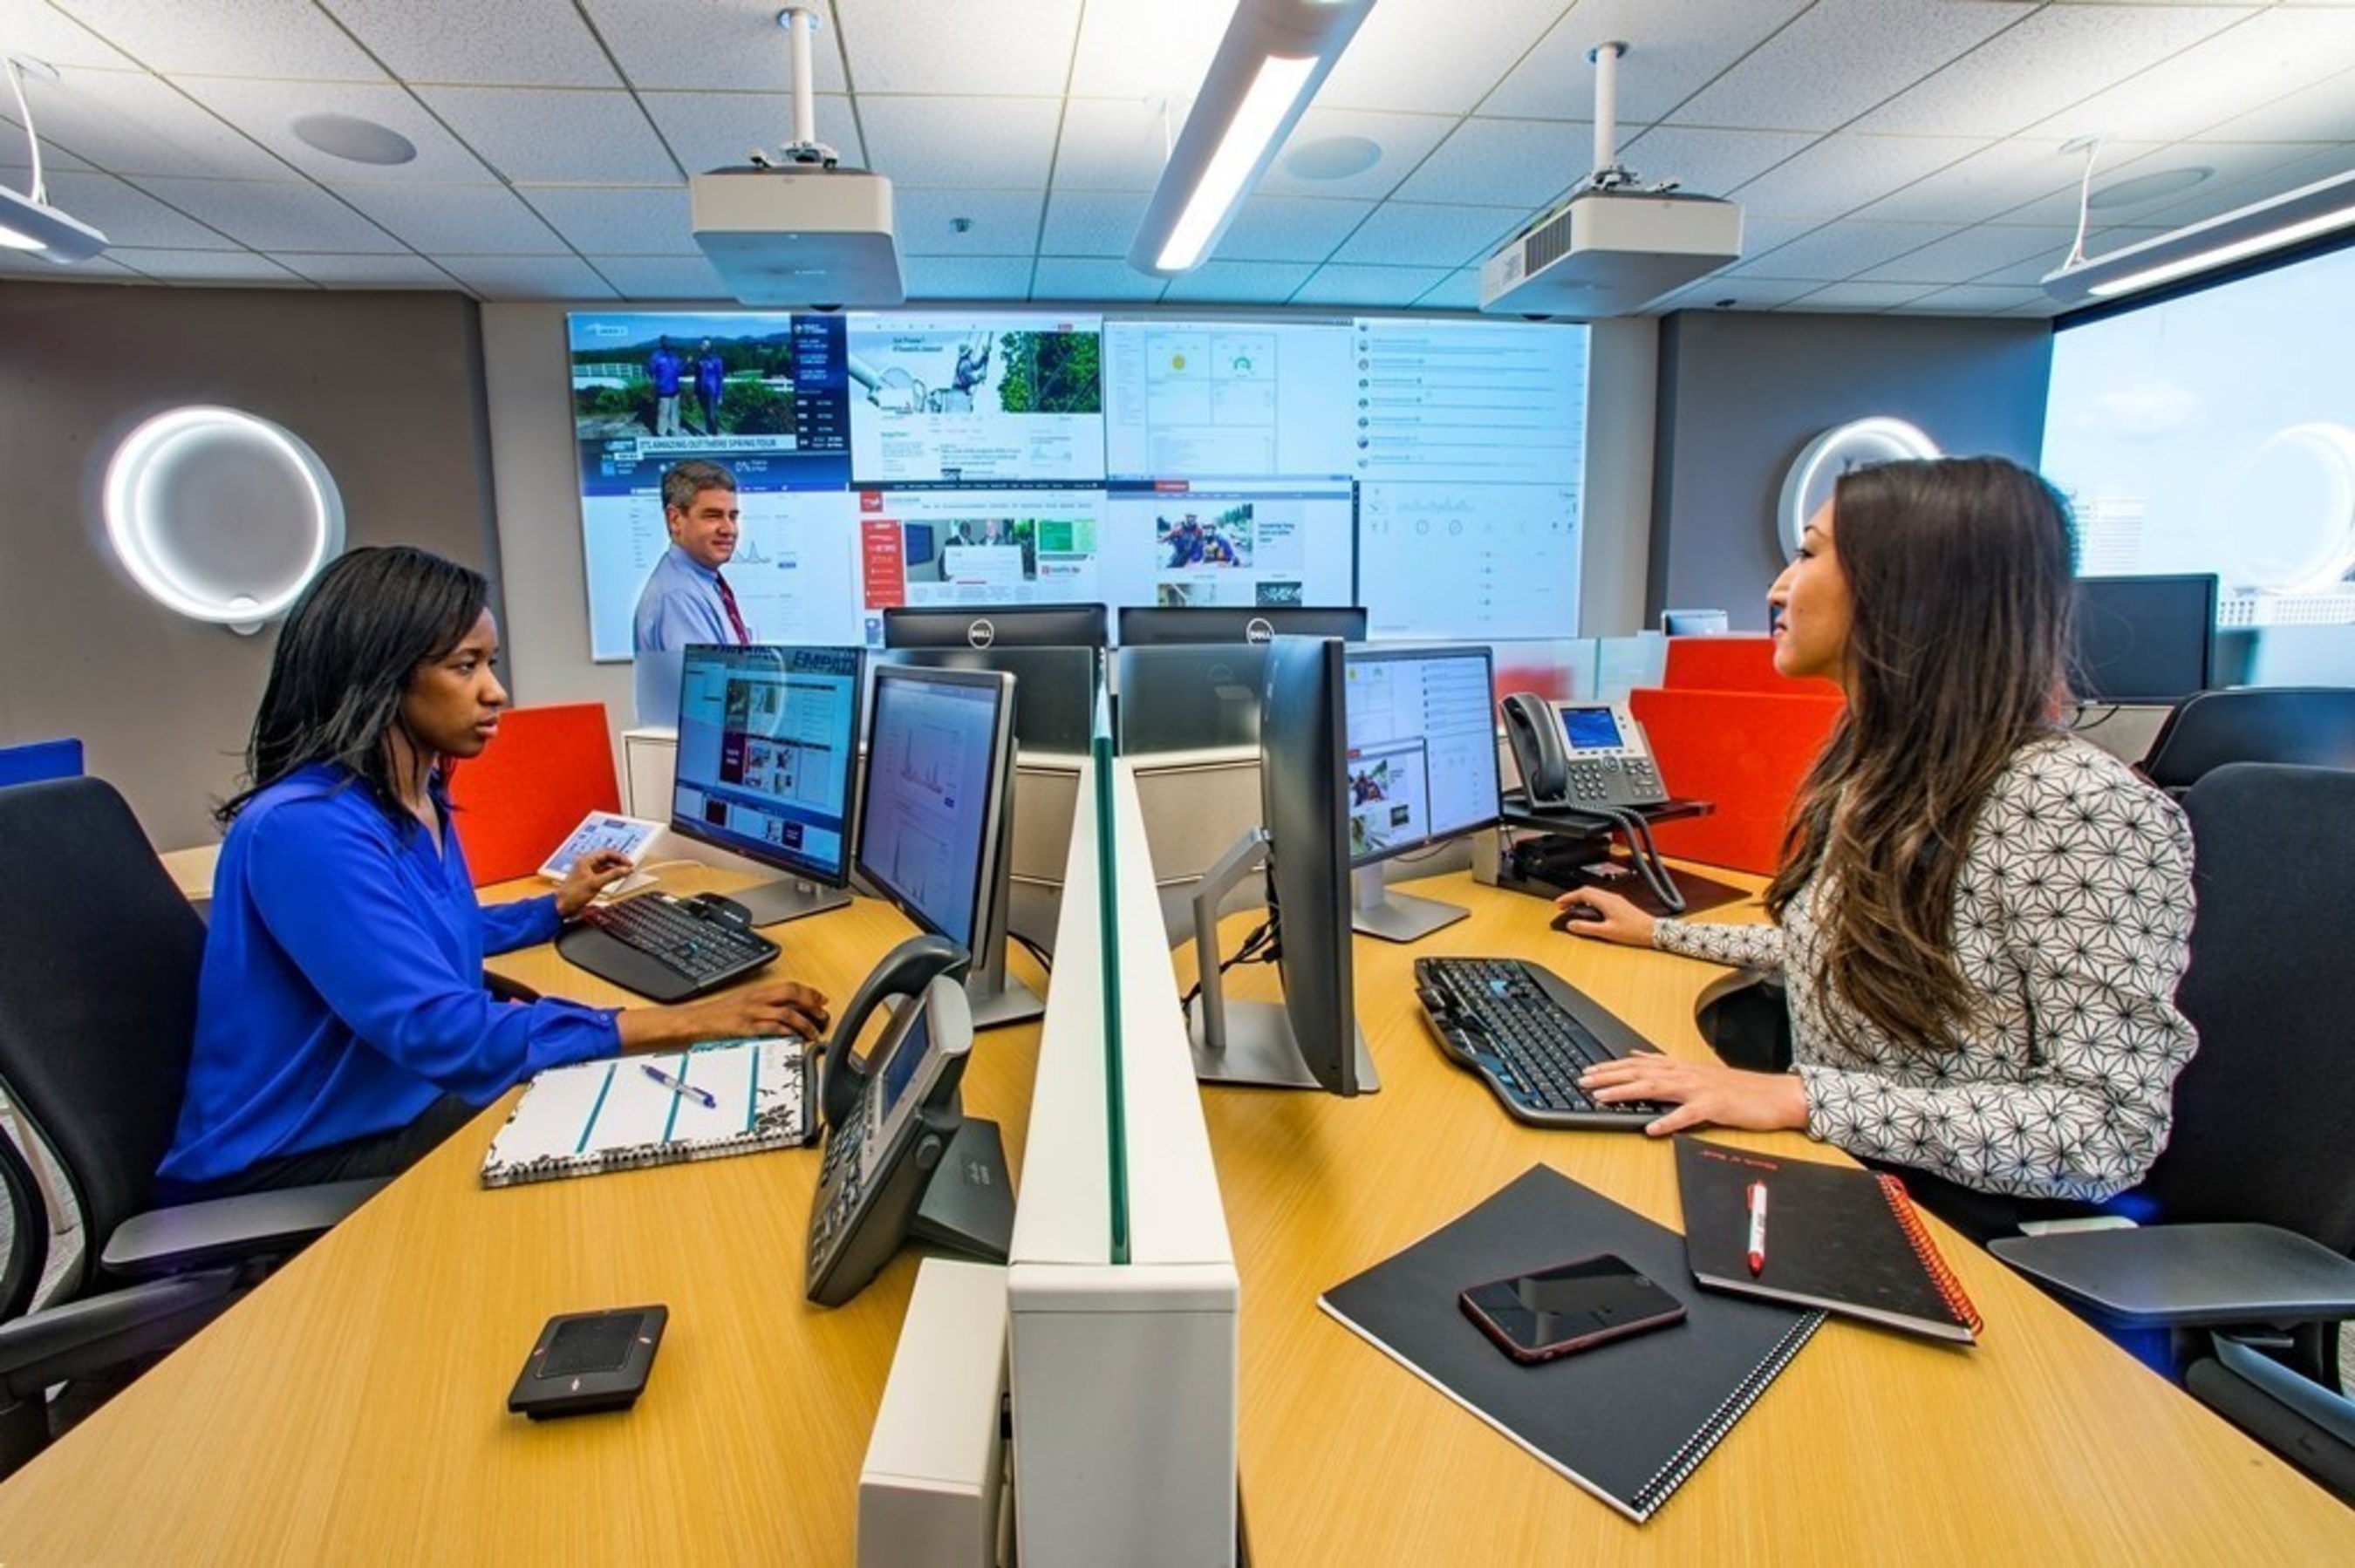 Inside Georgia Power's new Social Media Center in Atlanta. The center includes tools and technology to allow the company to respond to most customer inquiries on social media within 10 minutes and online chat requests in under a minute.